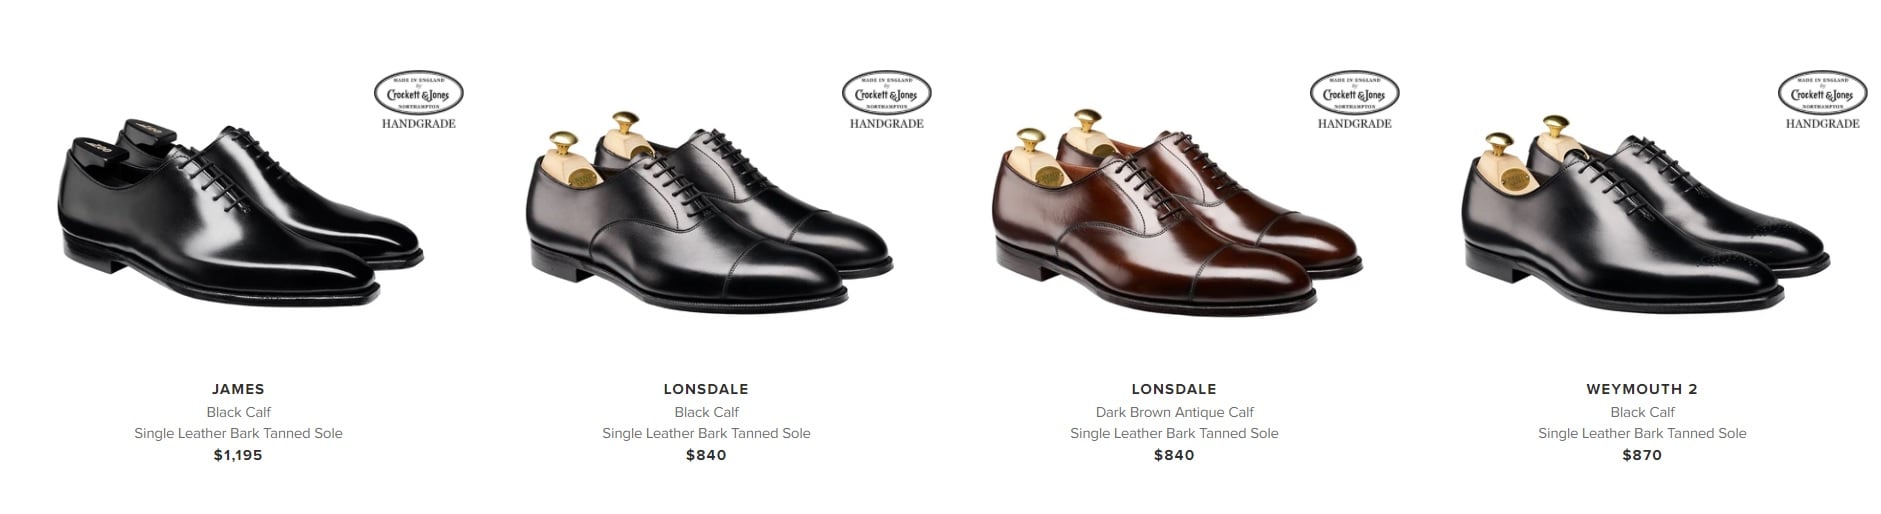 Why Are Wholecut Oxfords More Expensive?